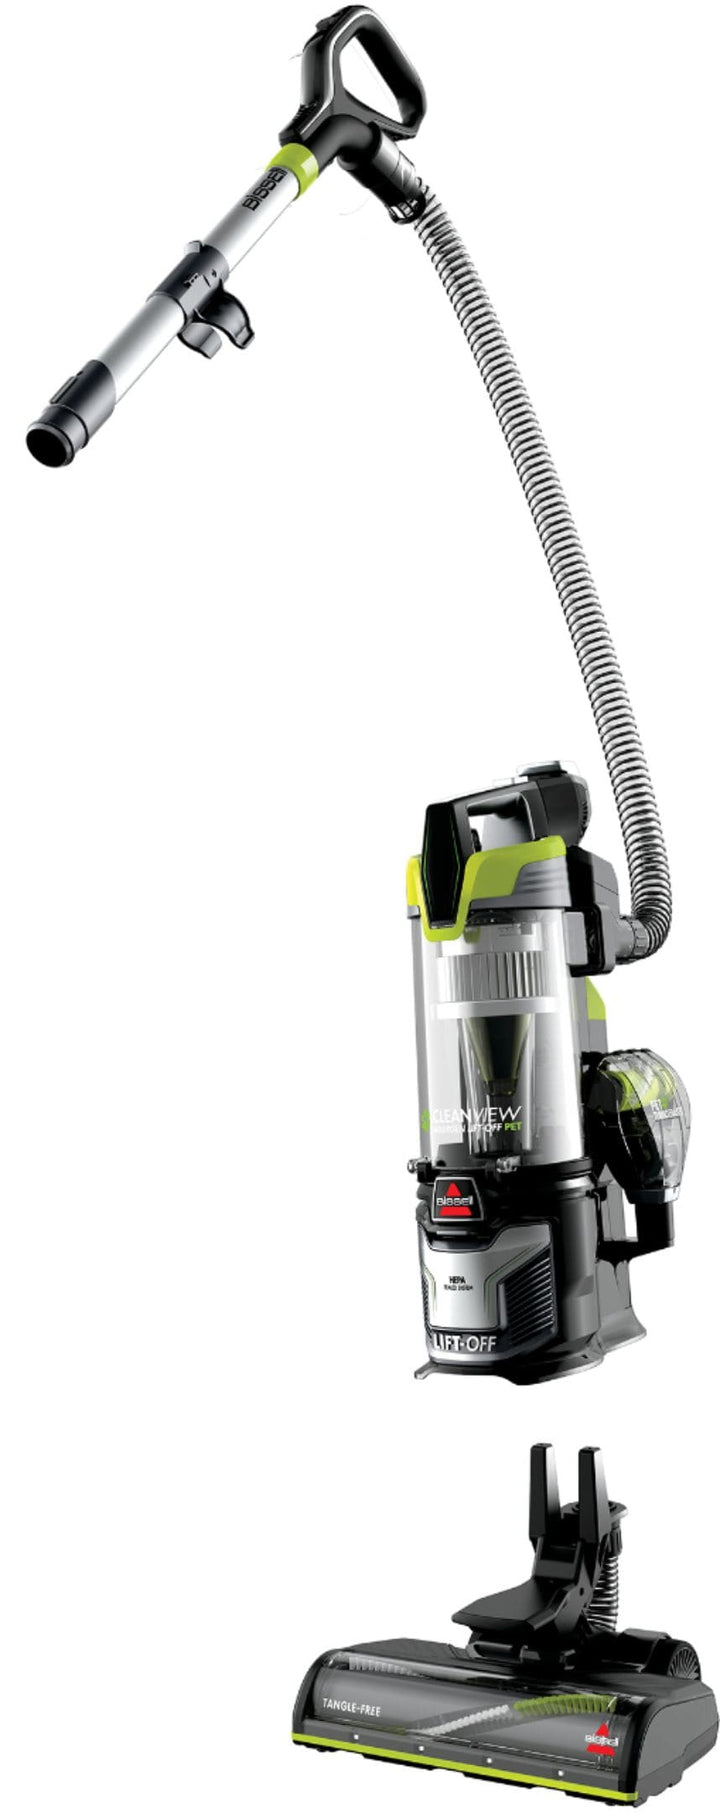 BISSELL - CleanView Allergen Lift-Off Pet Vacuum - Black/ Electric Green_6